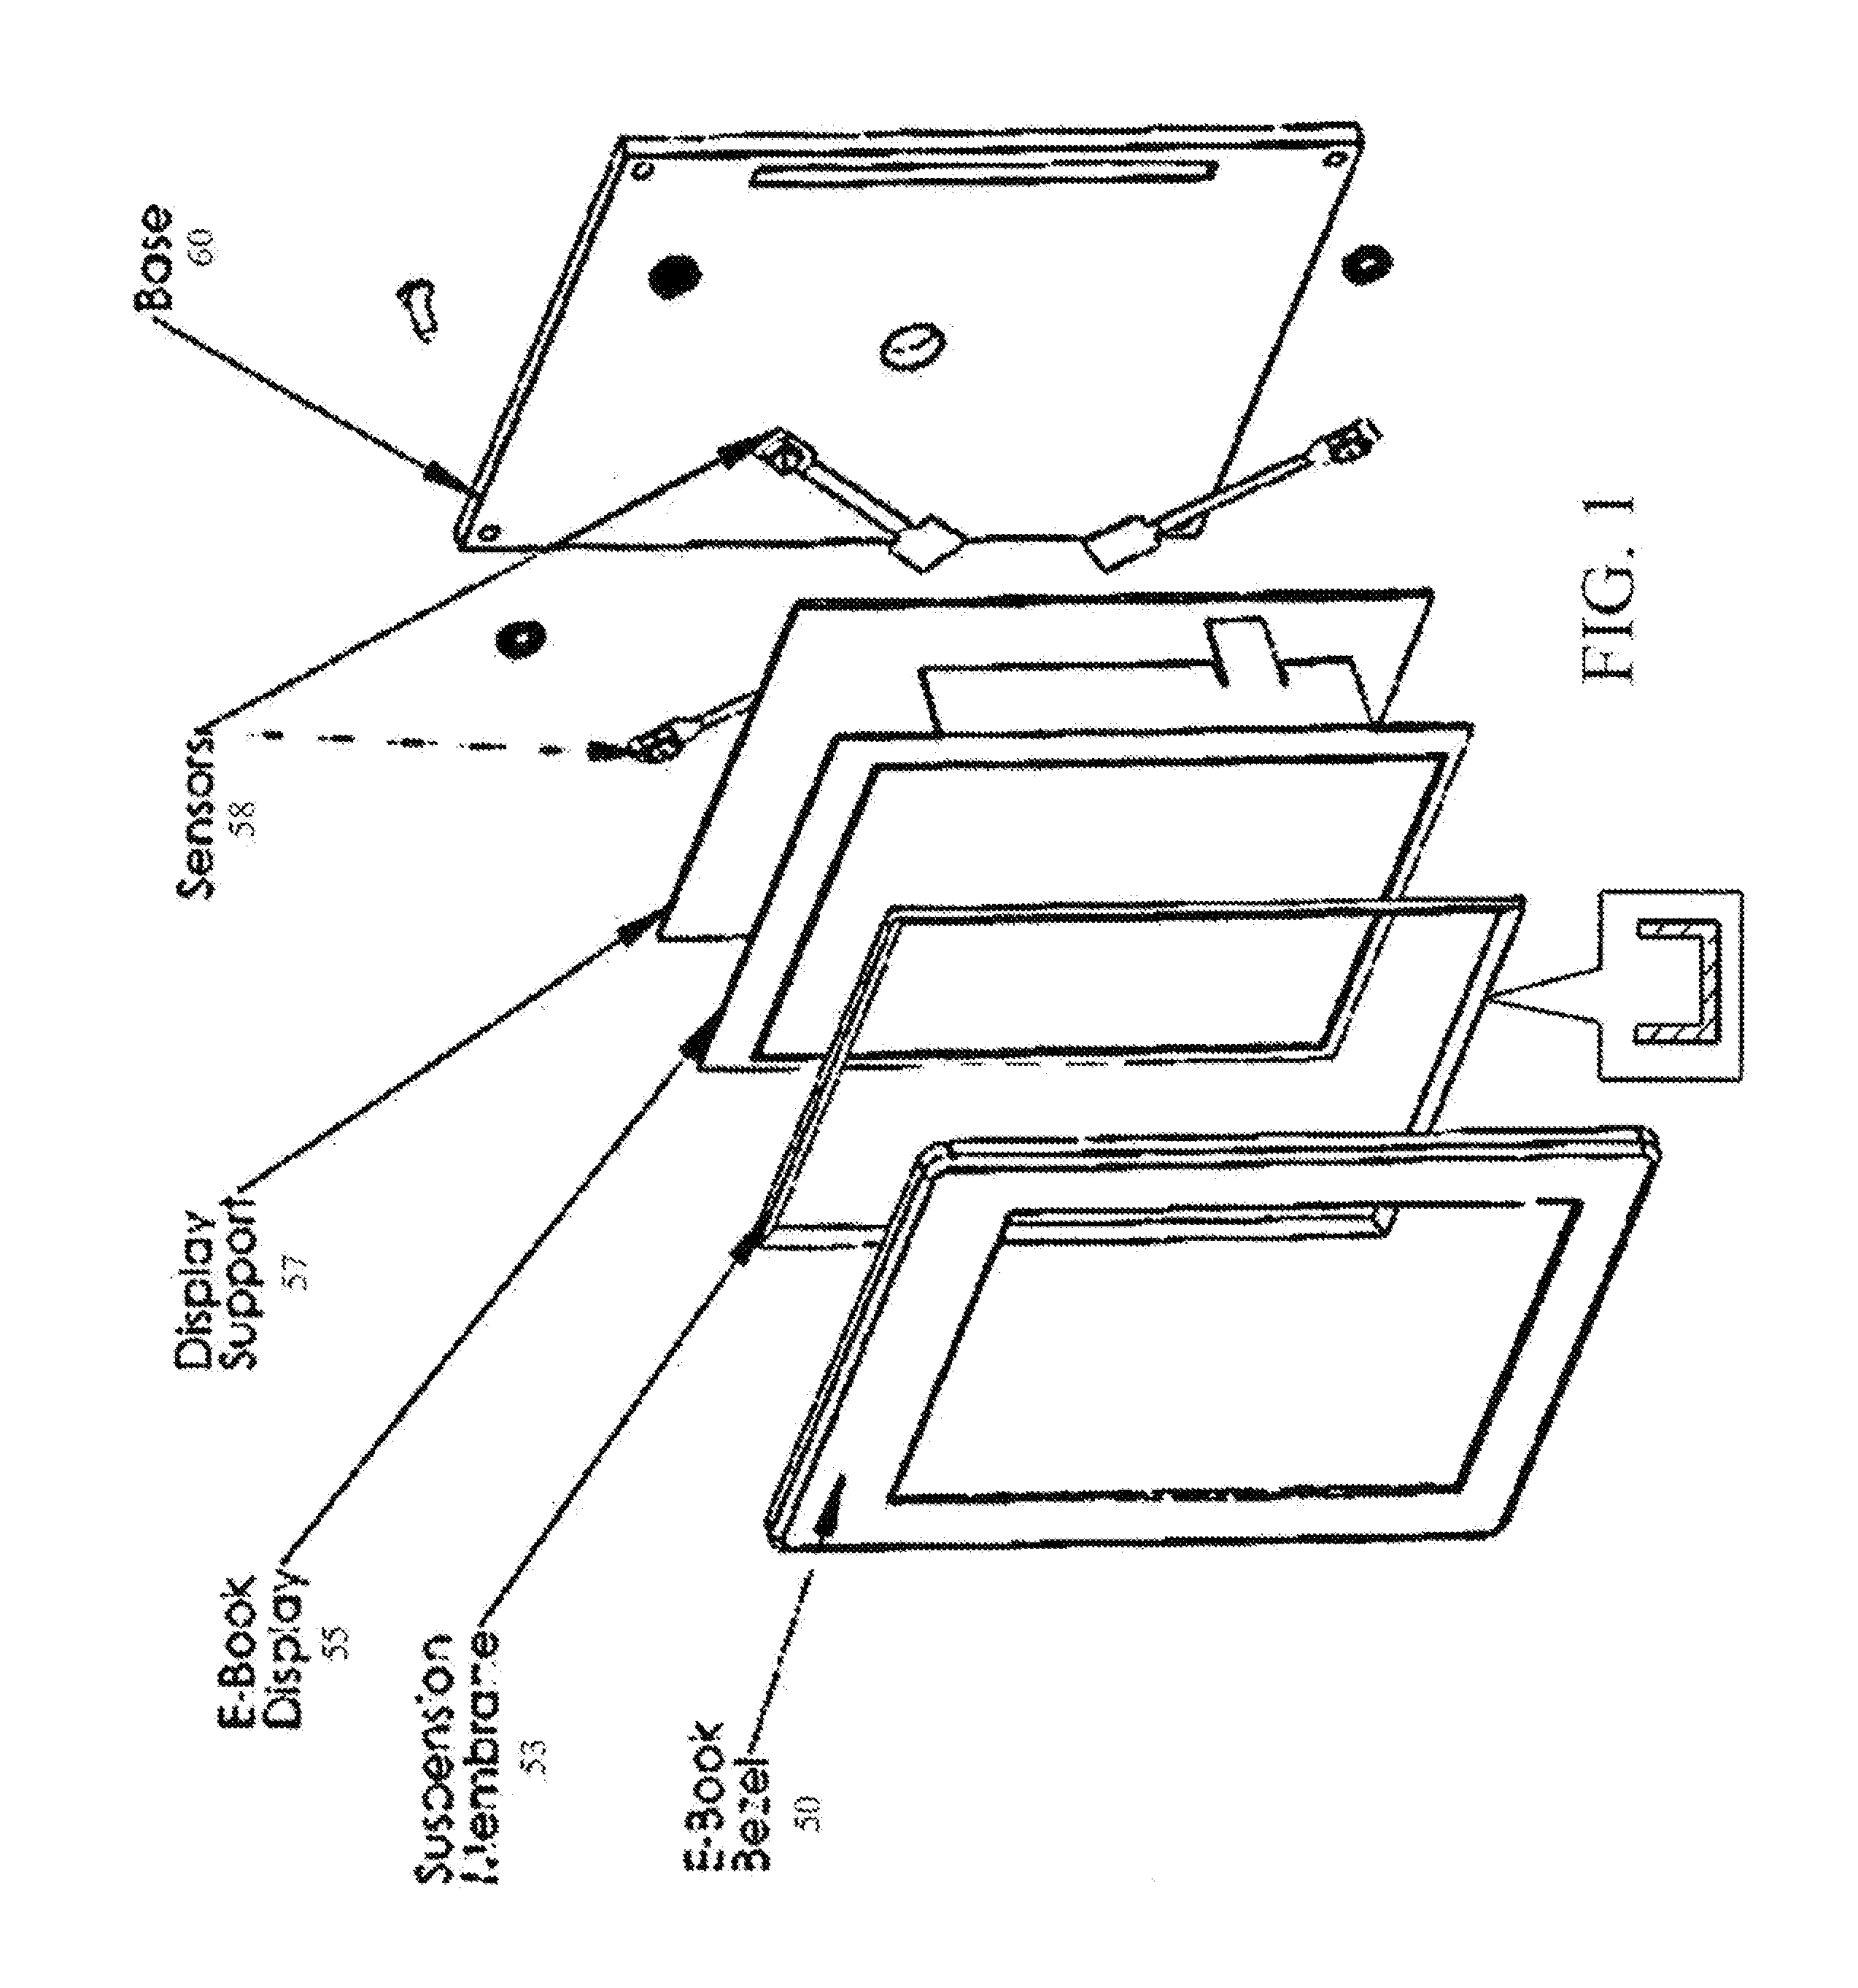 Suspension for a pressure sensitive touch display or panel